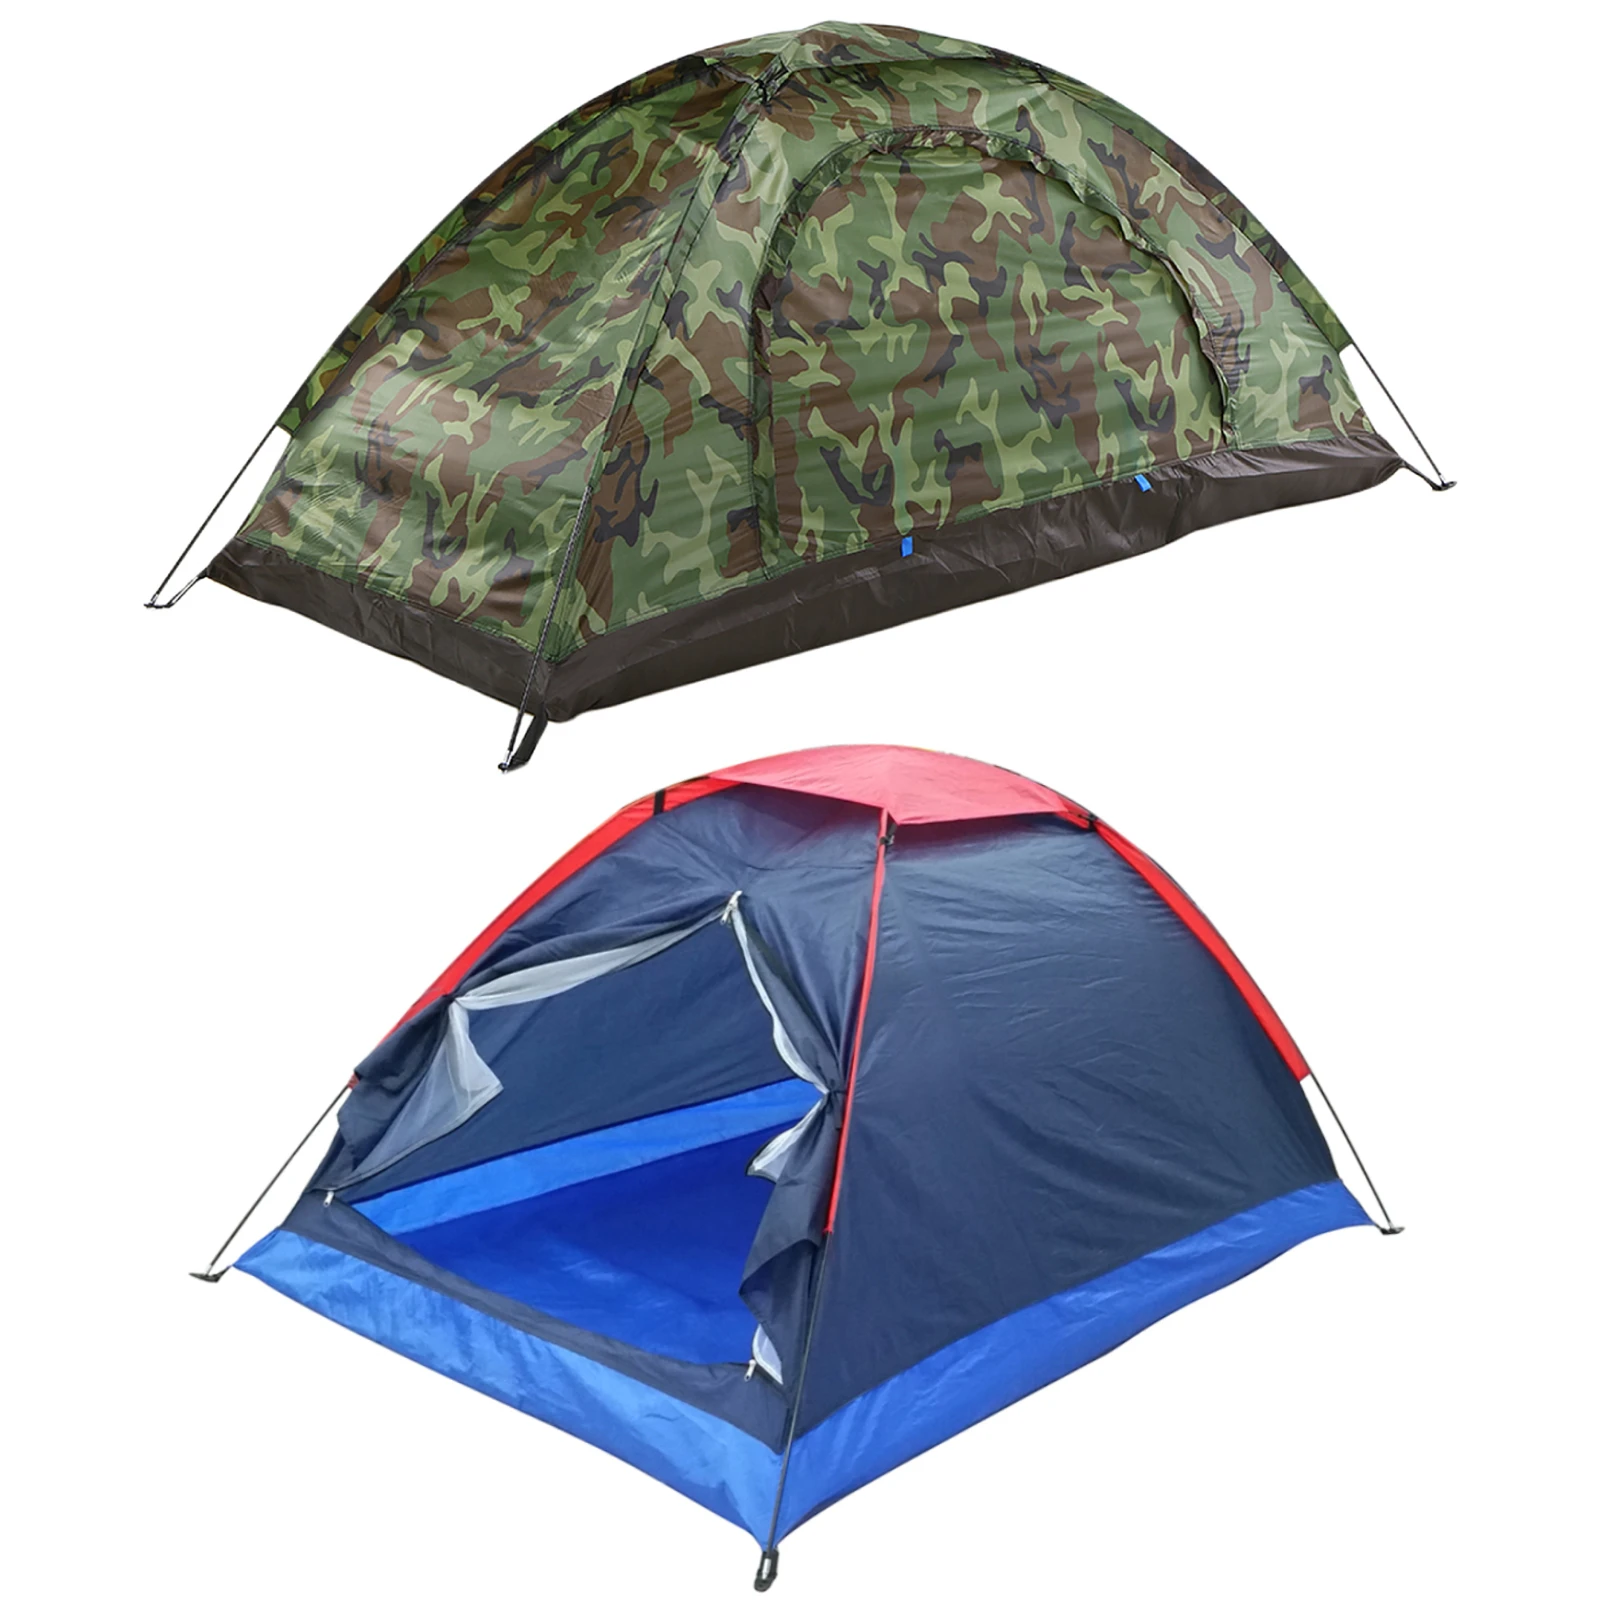 Camping Tent for 2 Person Single Layer Outdoor Portable Camouflage Handbag for Hiking,Travelling Lightweight Backpacking